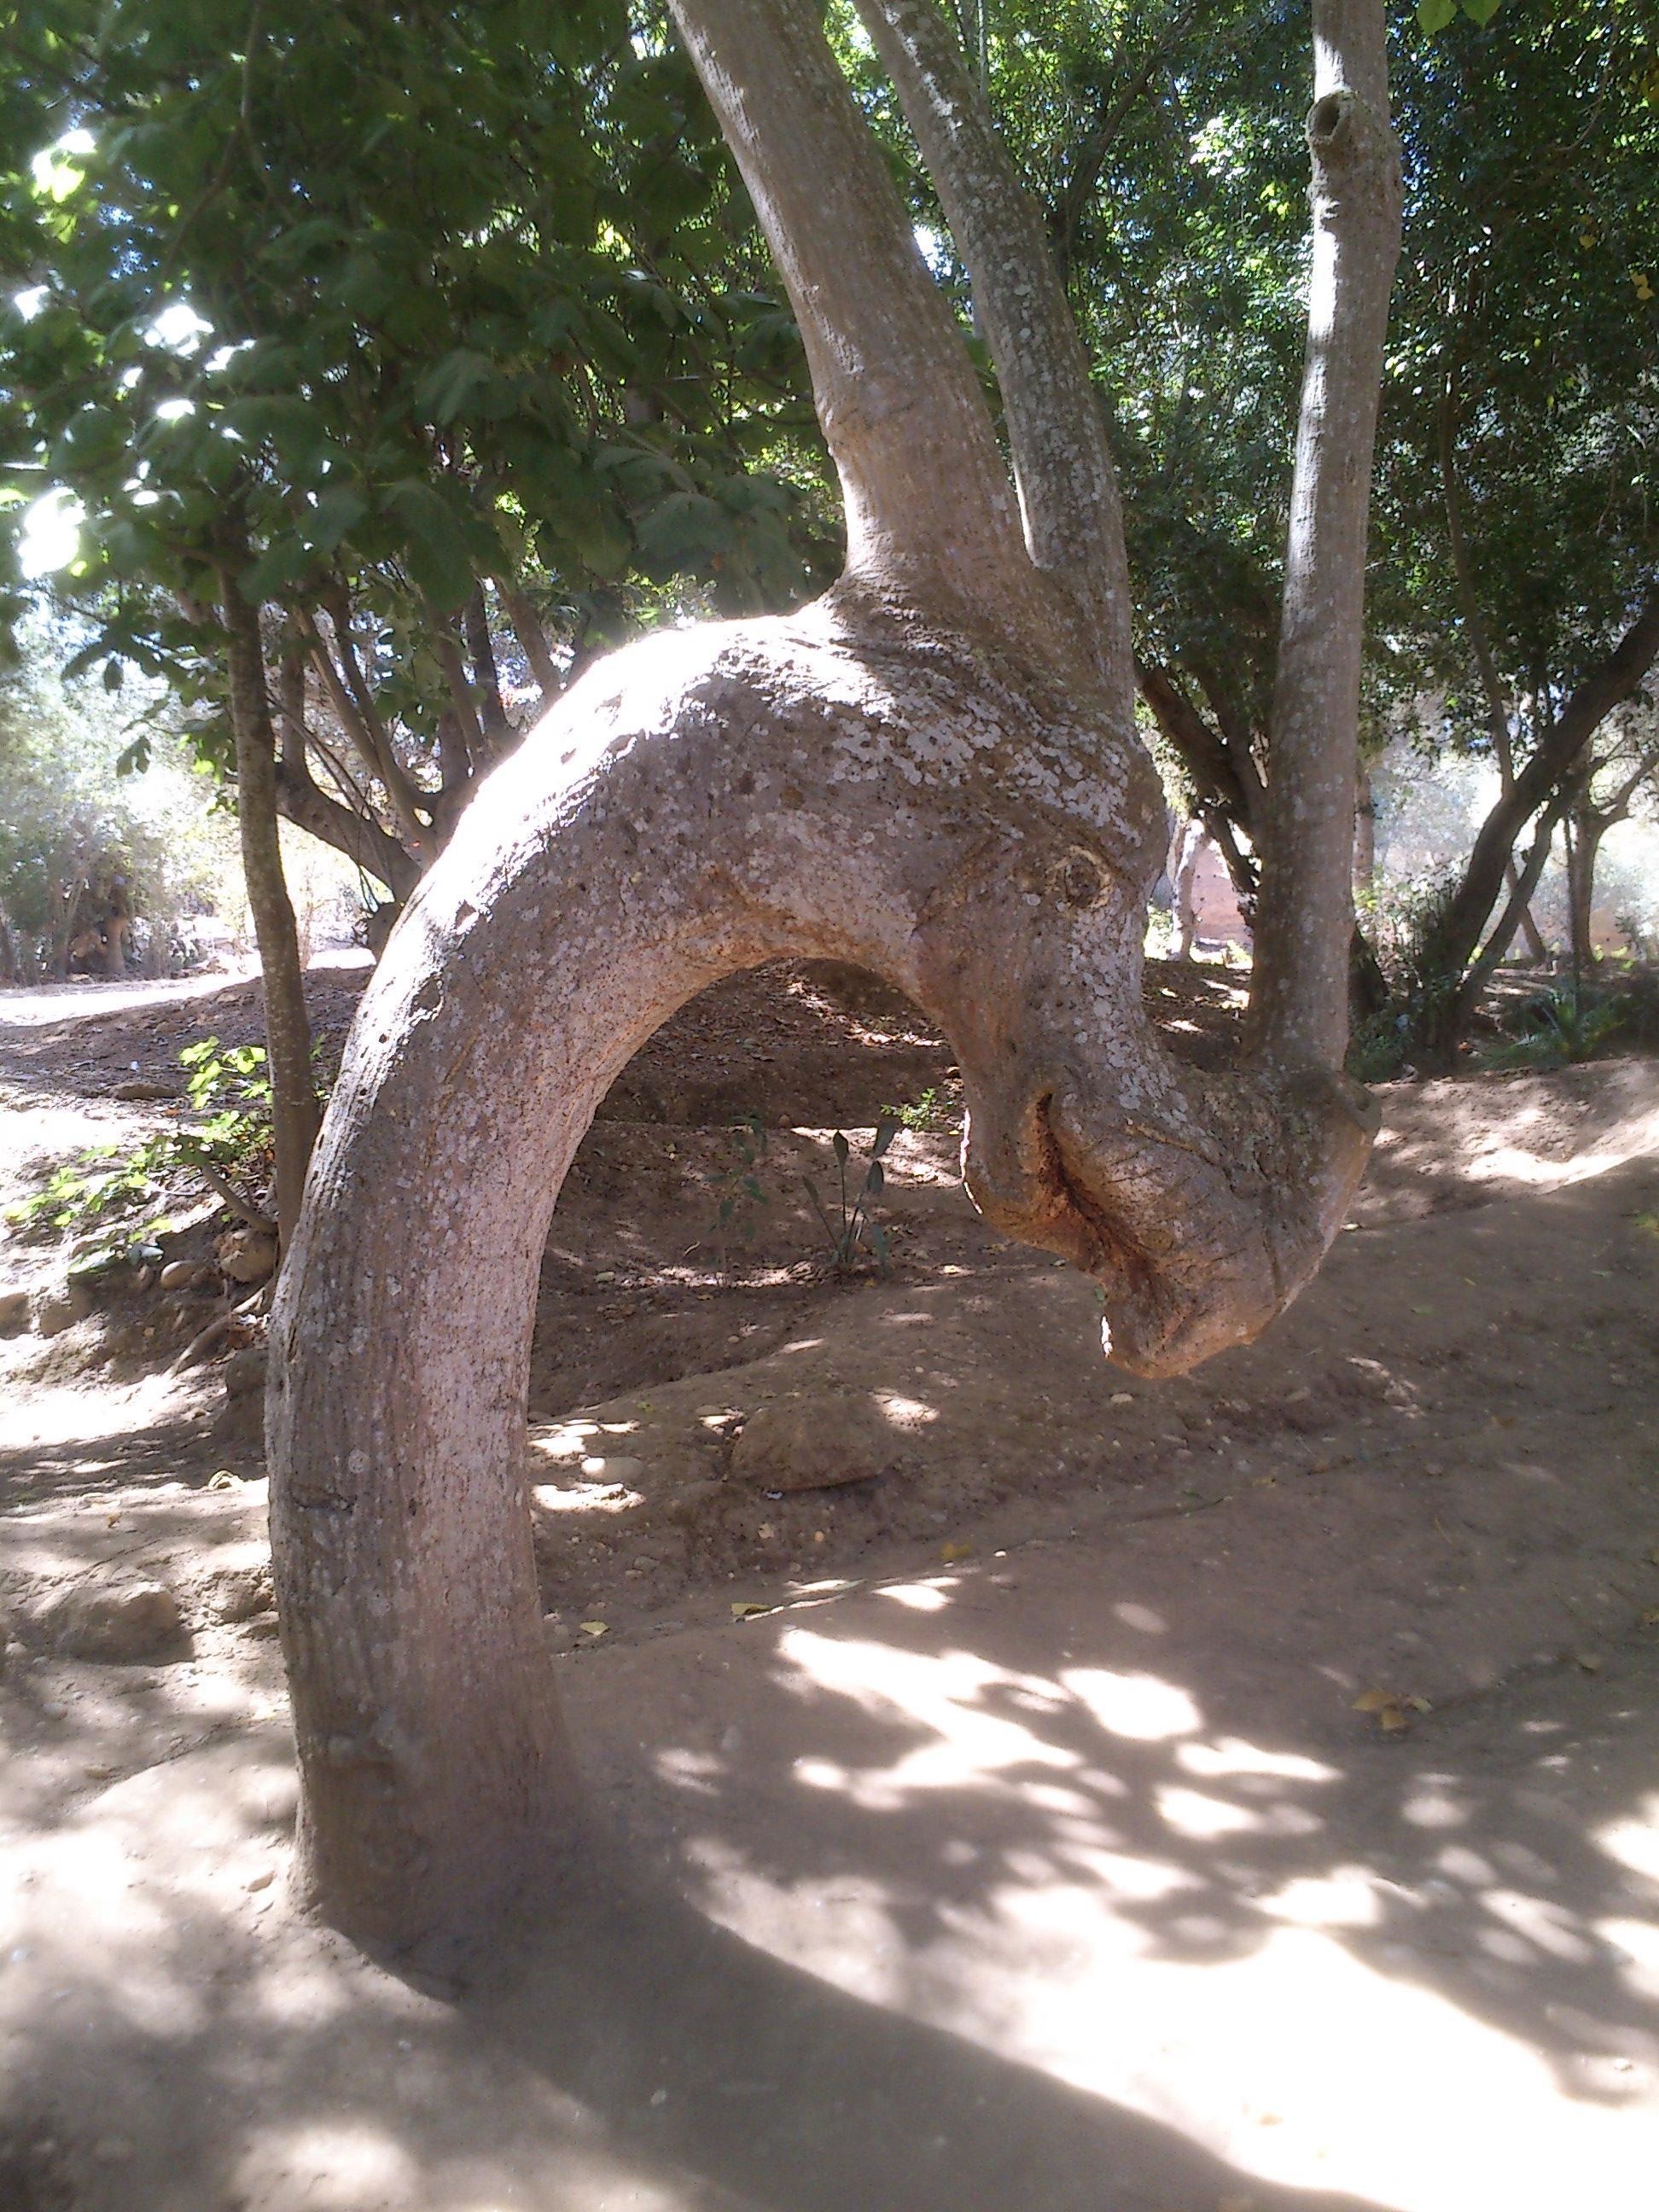 This tree grew naturally to look like a dragon.